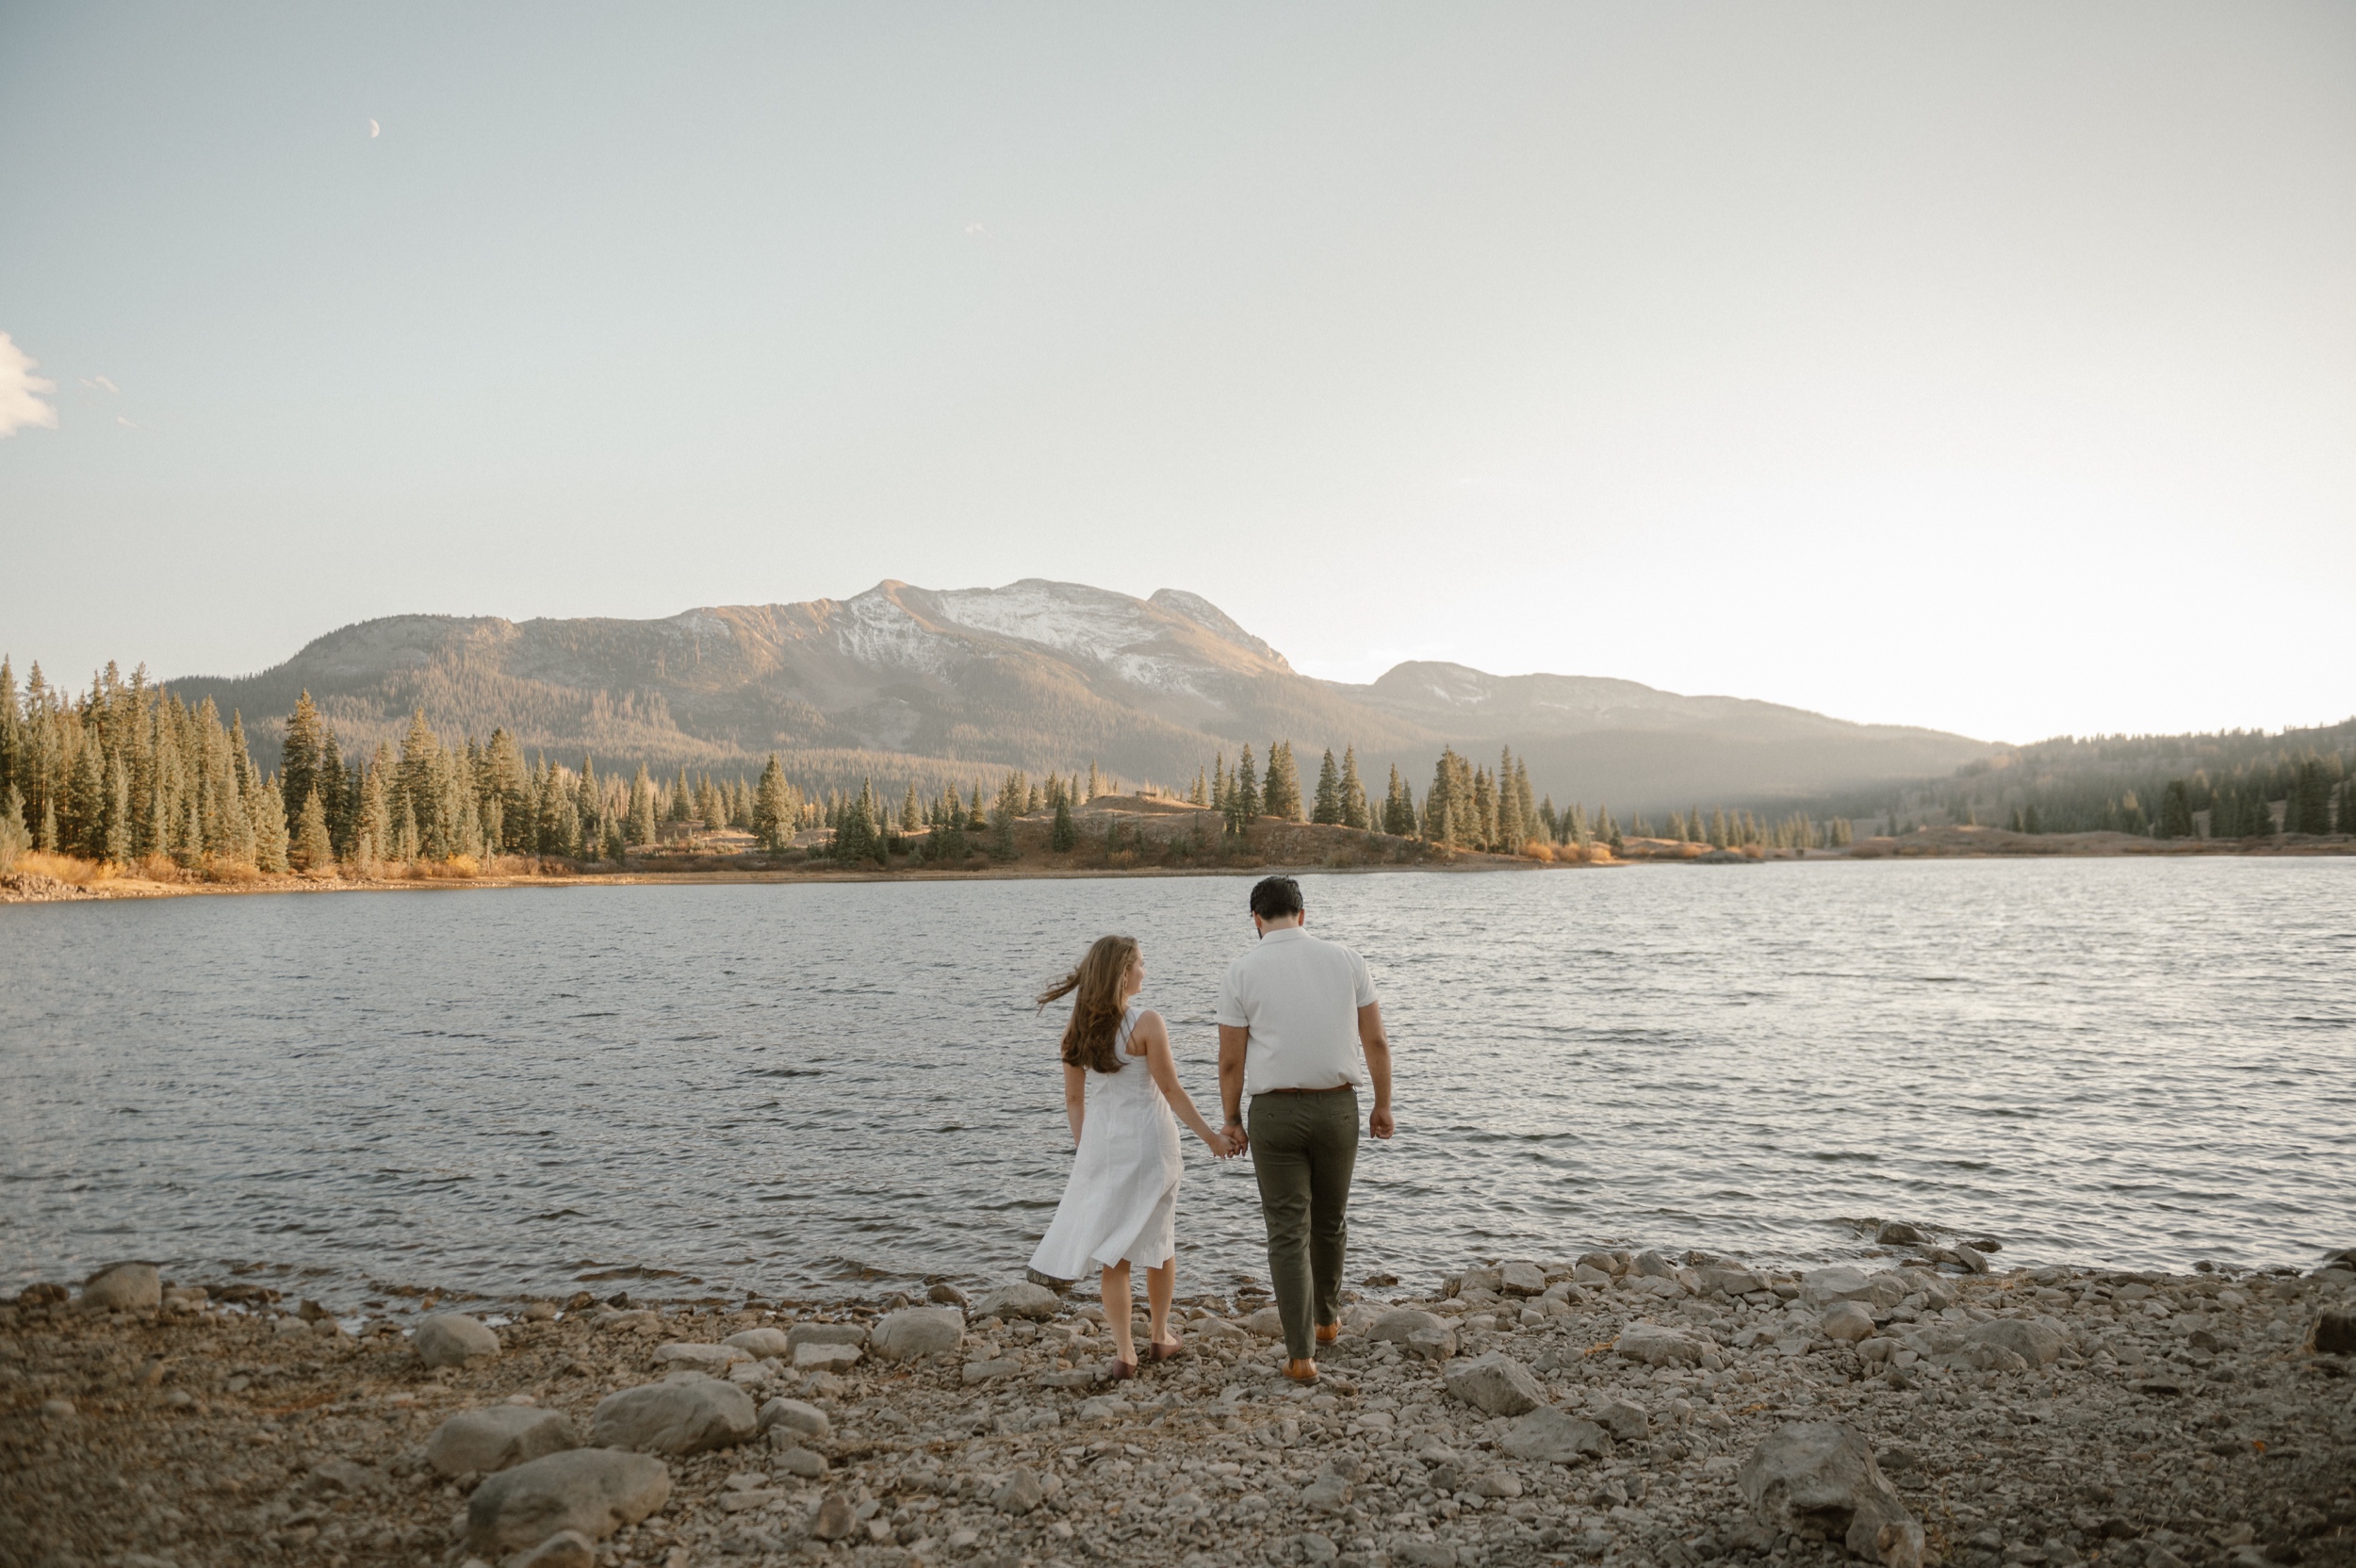 An engaged couple enjoying an intimate moment outdoors in a forest setting at Molas Lake in Colorado, during sunset. Photo by Colorado wedding photographer Ashley Joyce.